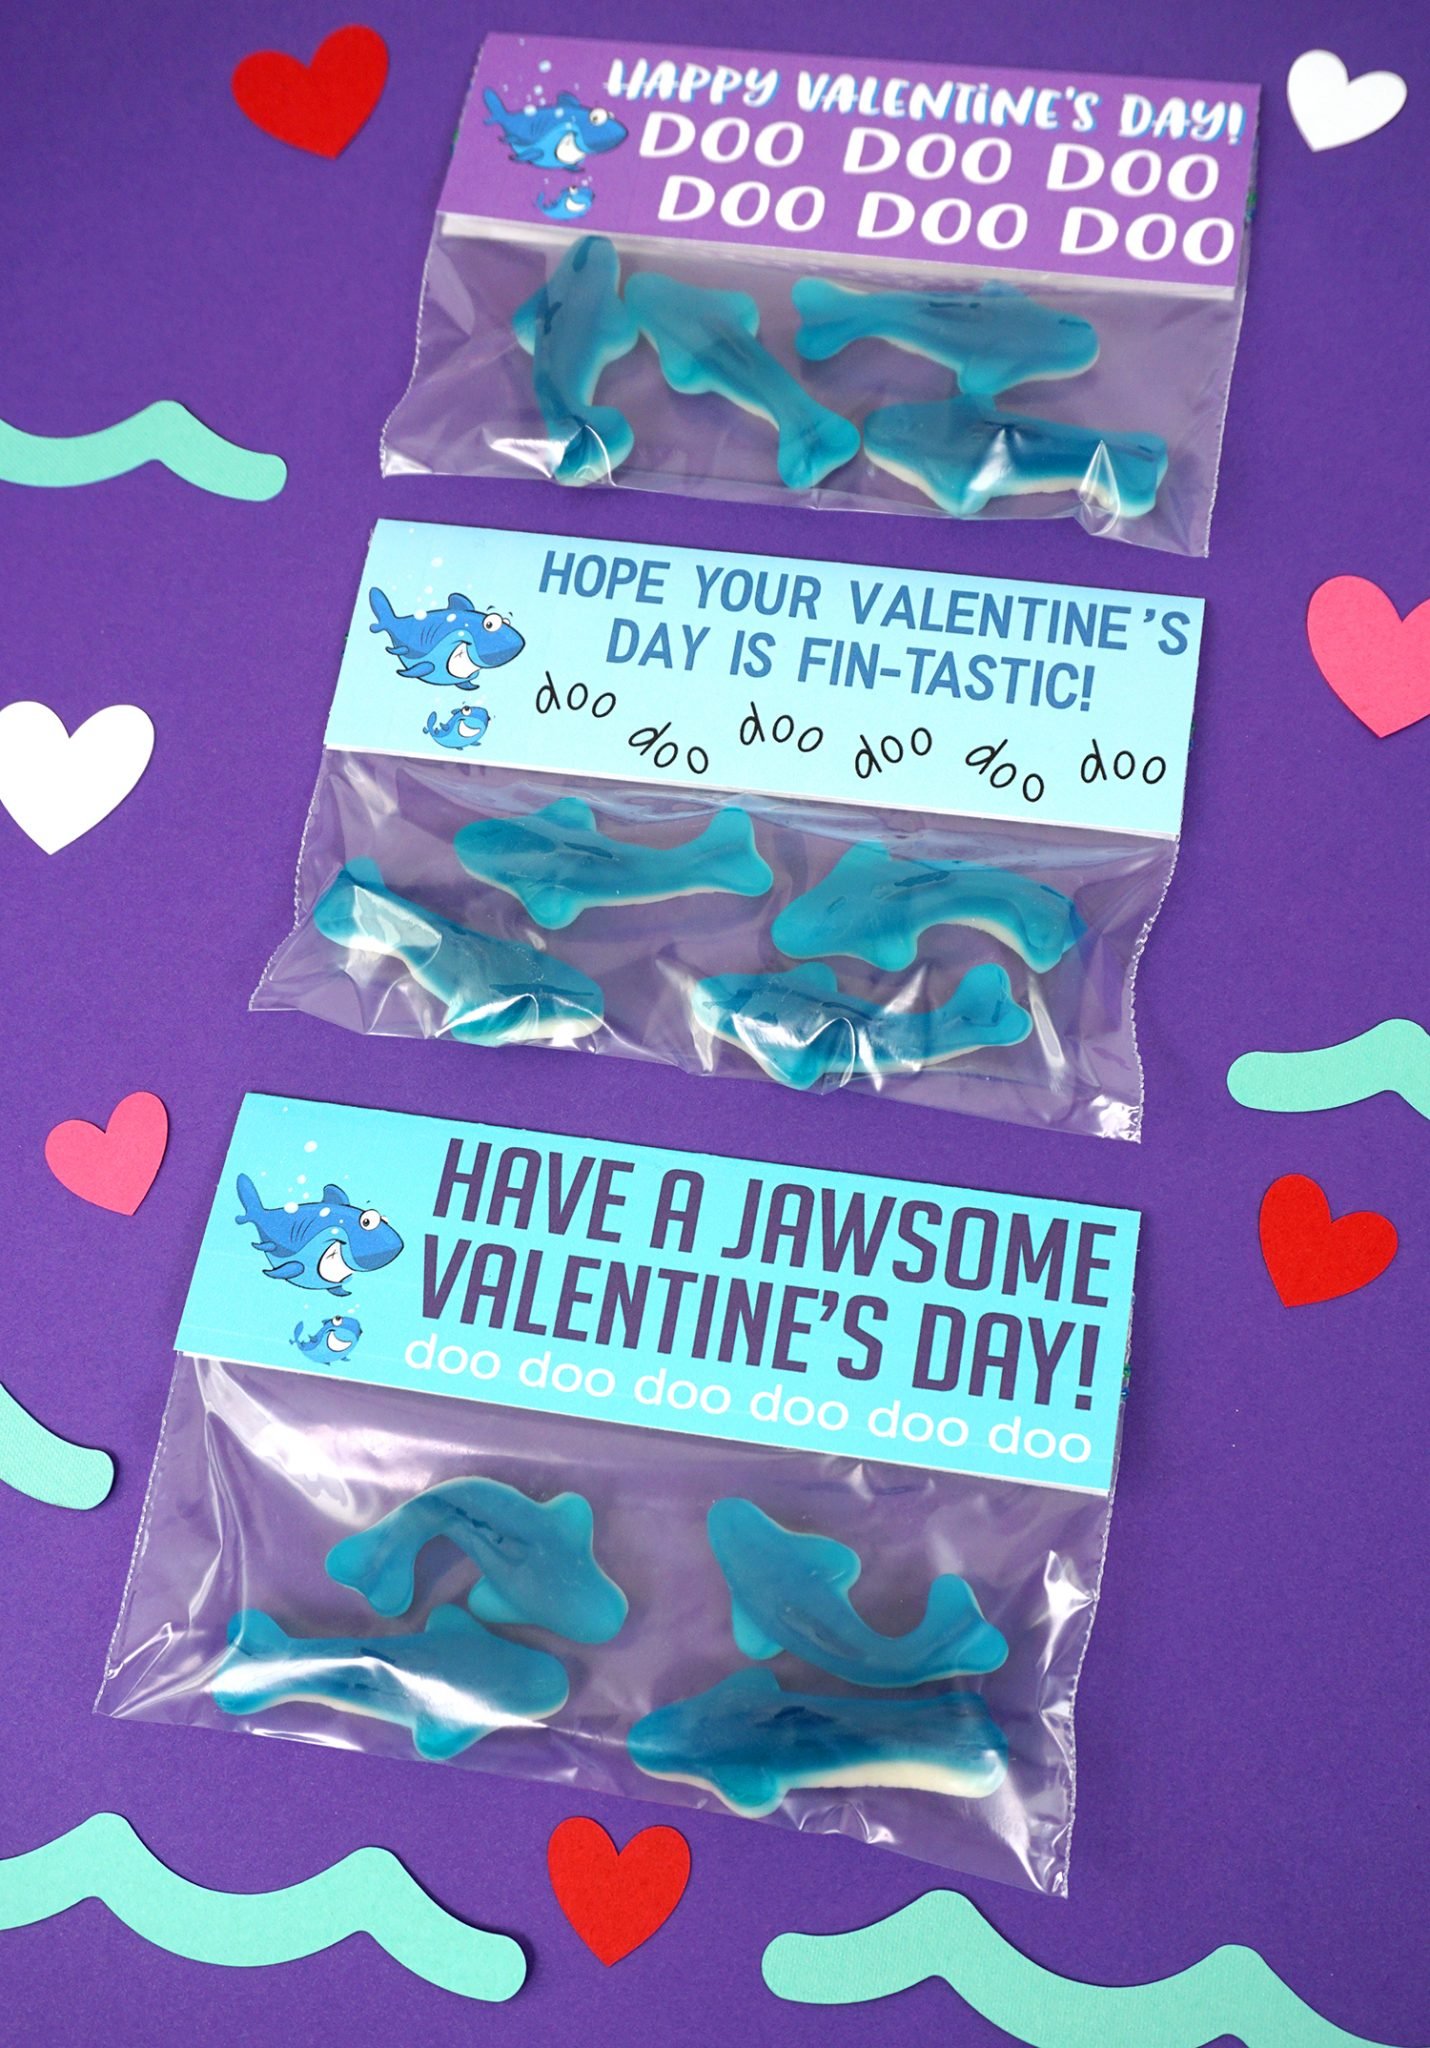 Baby Shark Valentines Cards - Happiness is Homemade